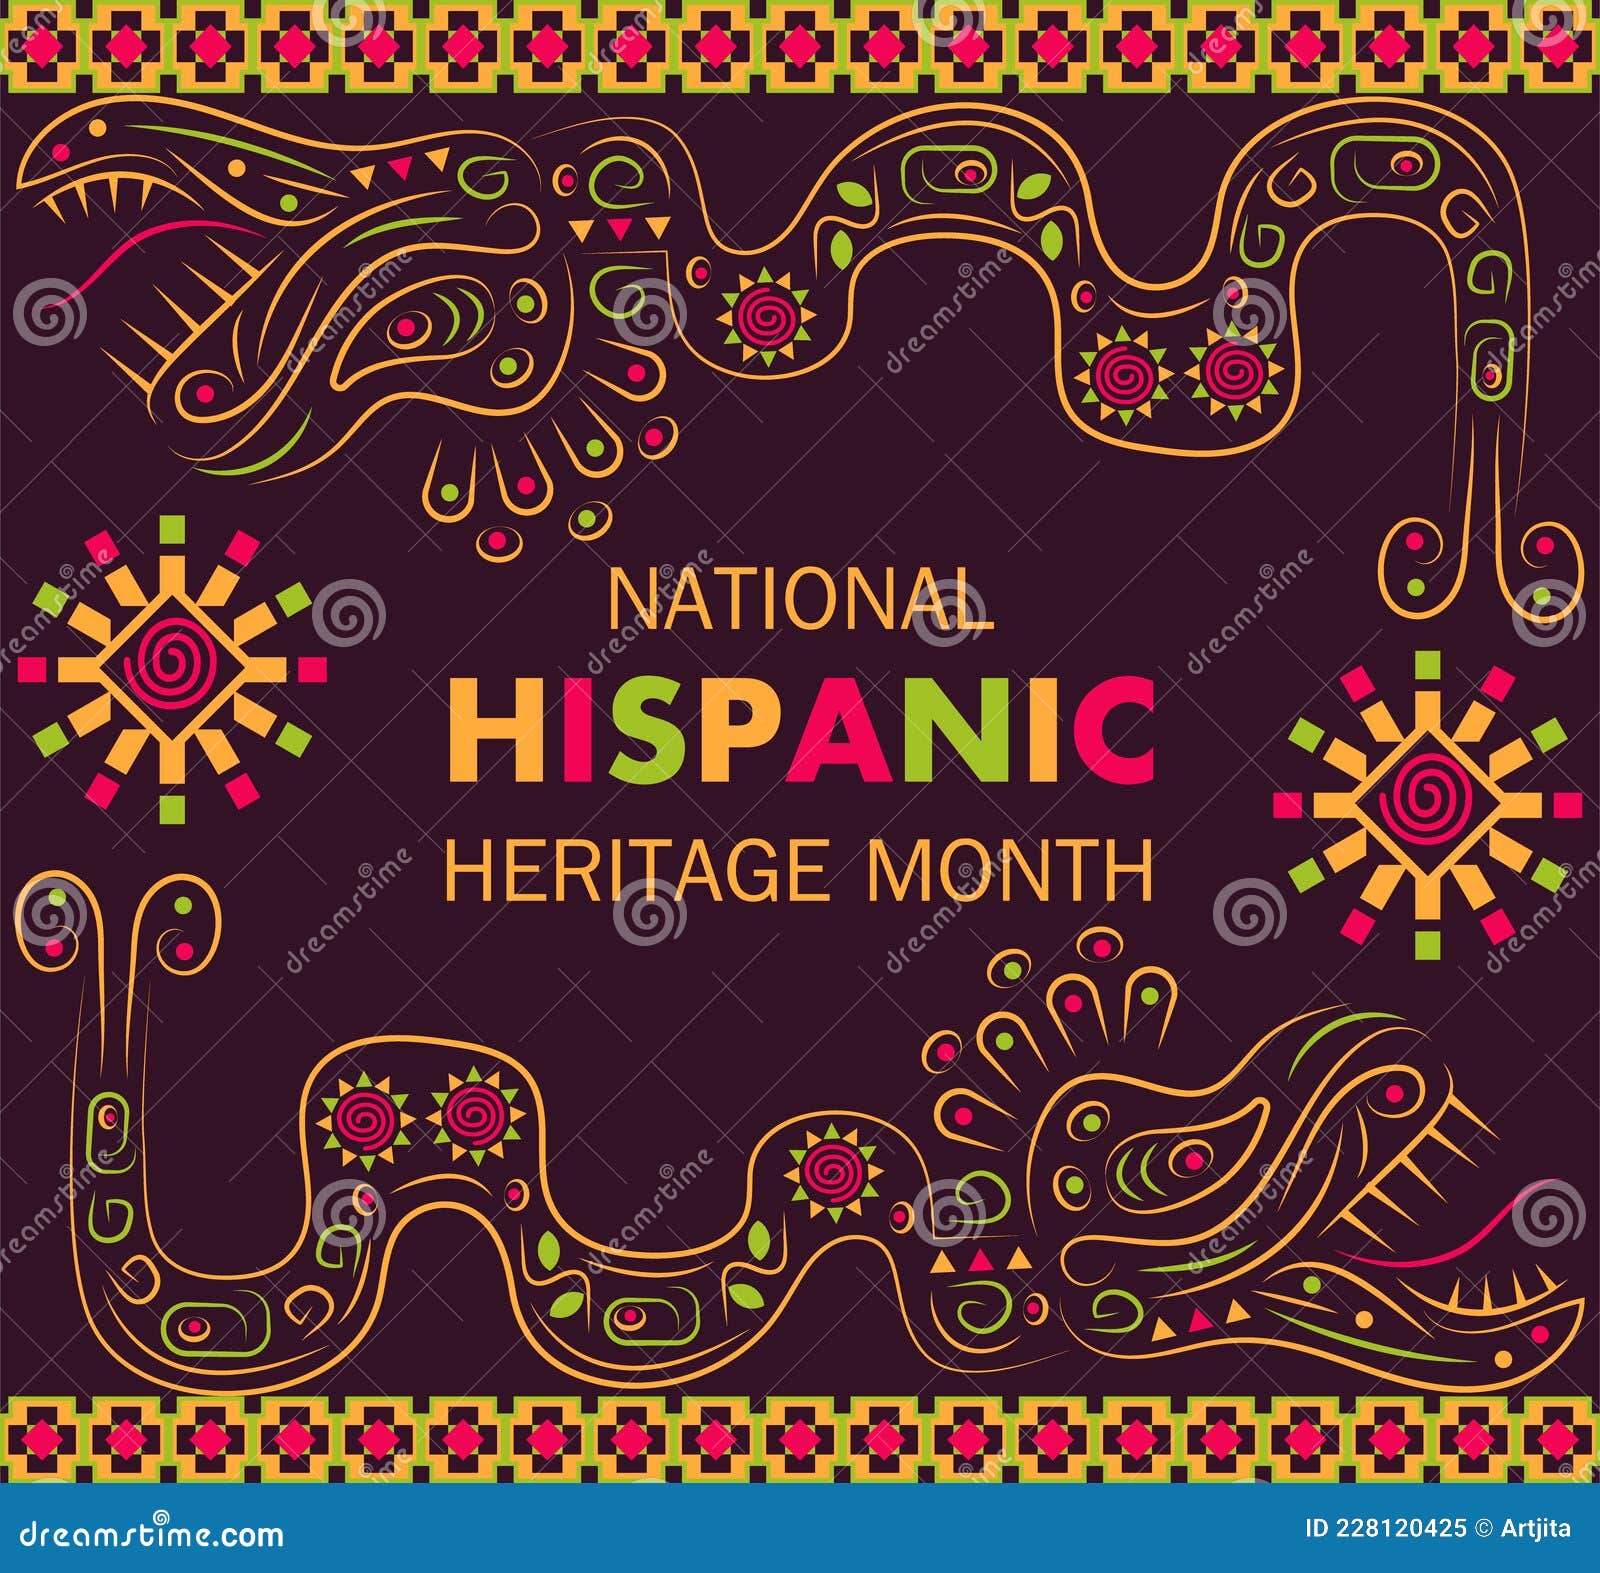 national hispanic heritage month celebrated from 15 september to 15 october usa